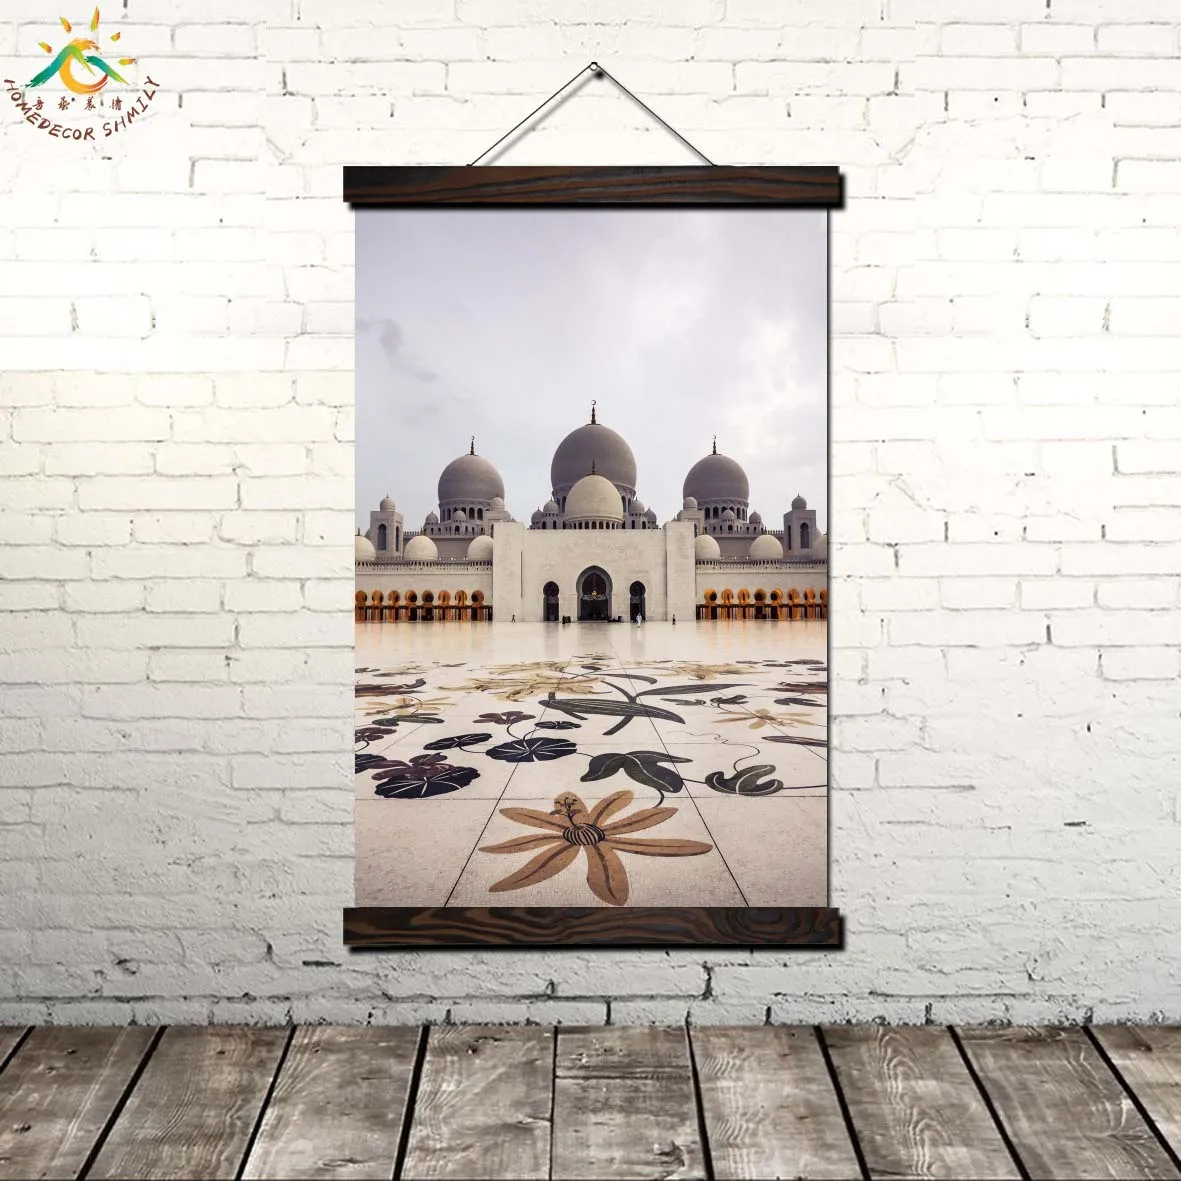 

Islamic Grand Mosque Abu Dhabi Modern Canvas Art Prints Poster Wall Painting Painting Artwork Wall Art Pictures Home Decor